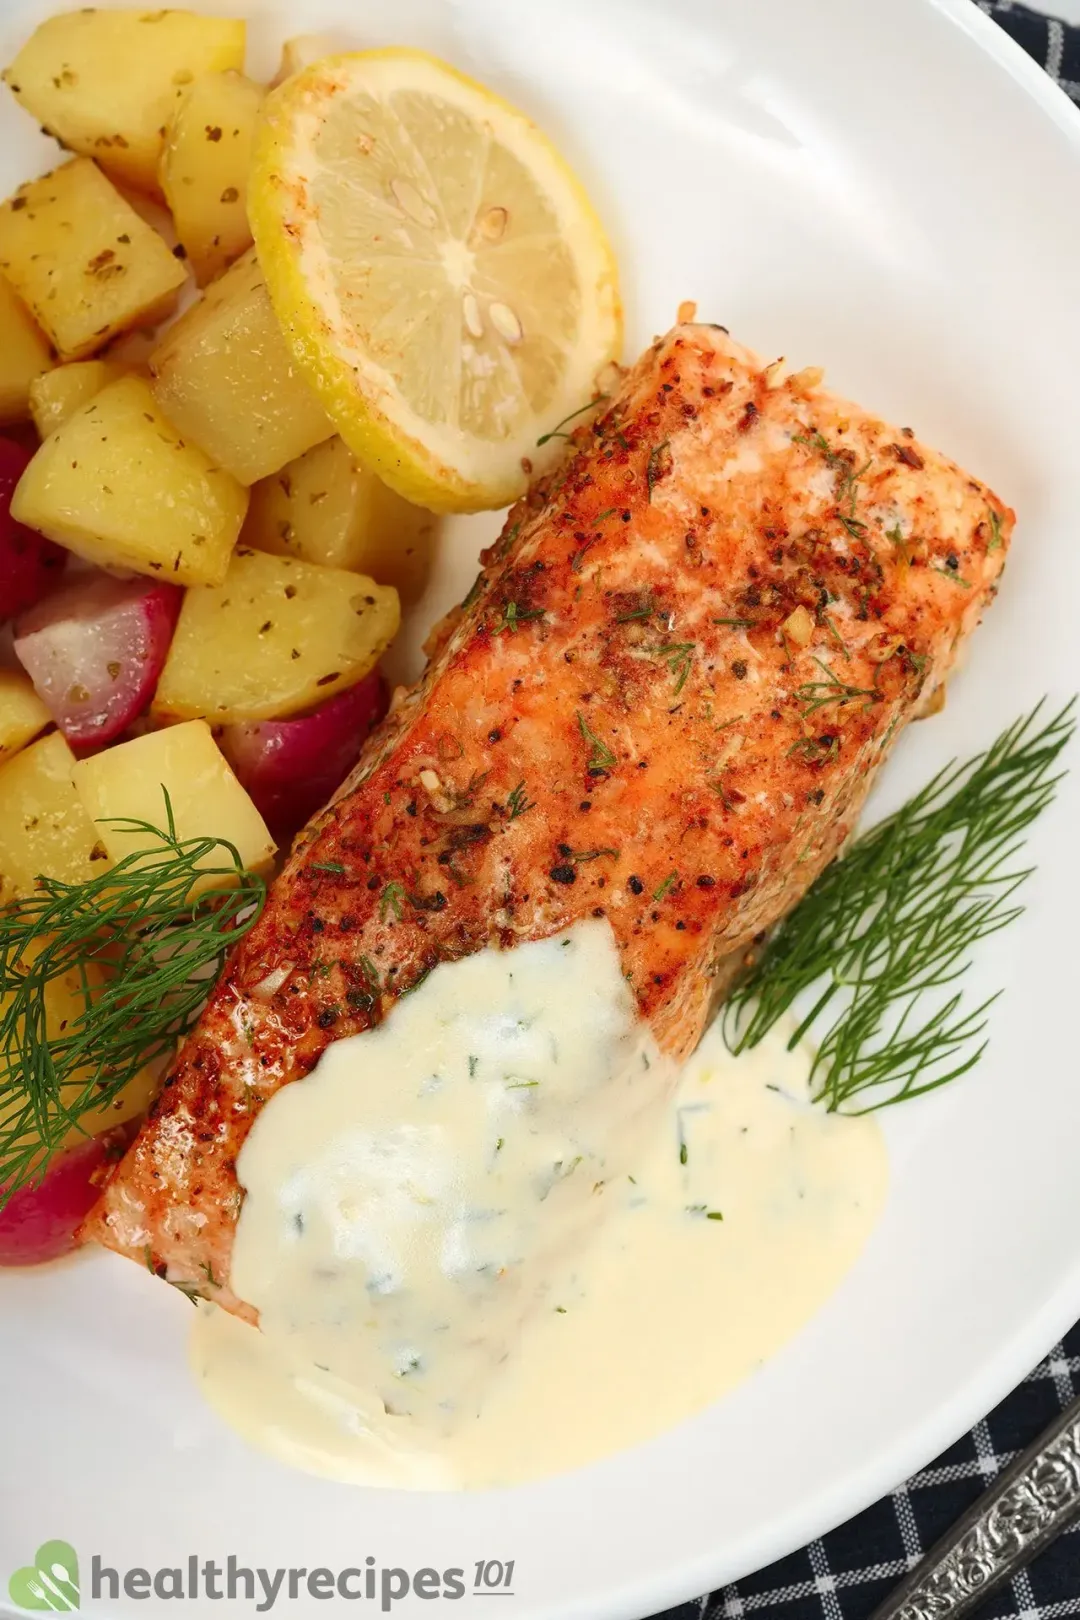 A cooked salmon fillet is partially covered in a creamy white sauce laid near fresh dill, potato cubes, and a lemon slice